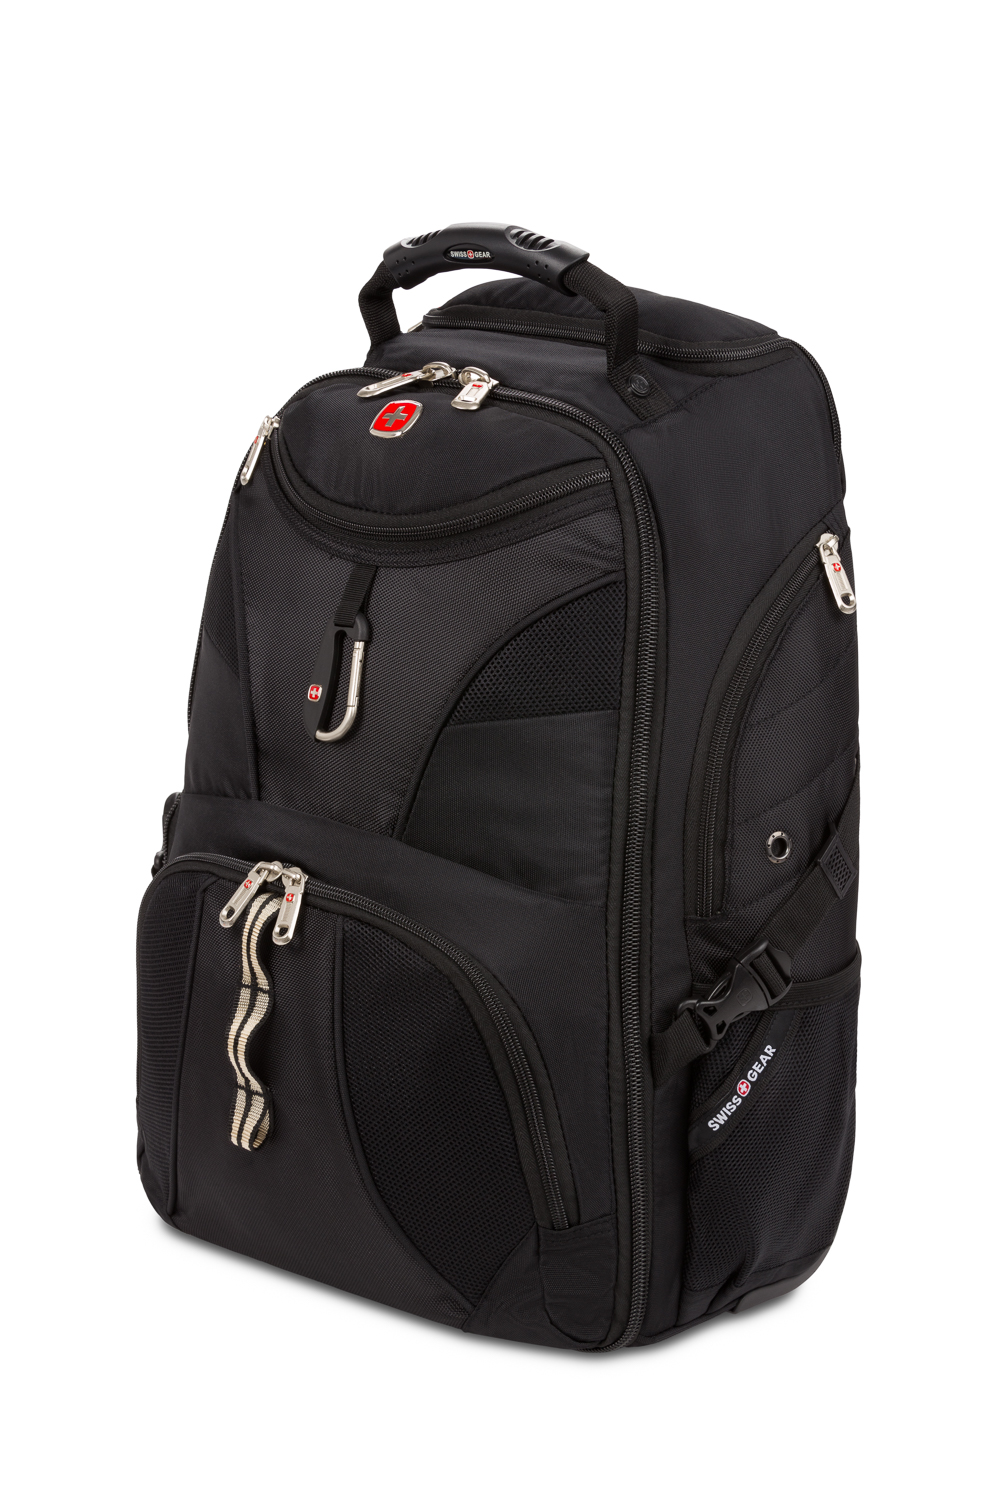 Swiss Army Rolling Backpack | stickhealthcare.co.uk